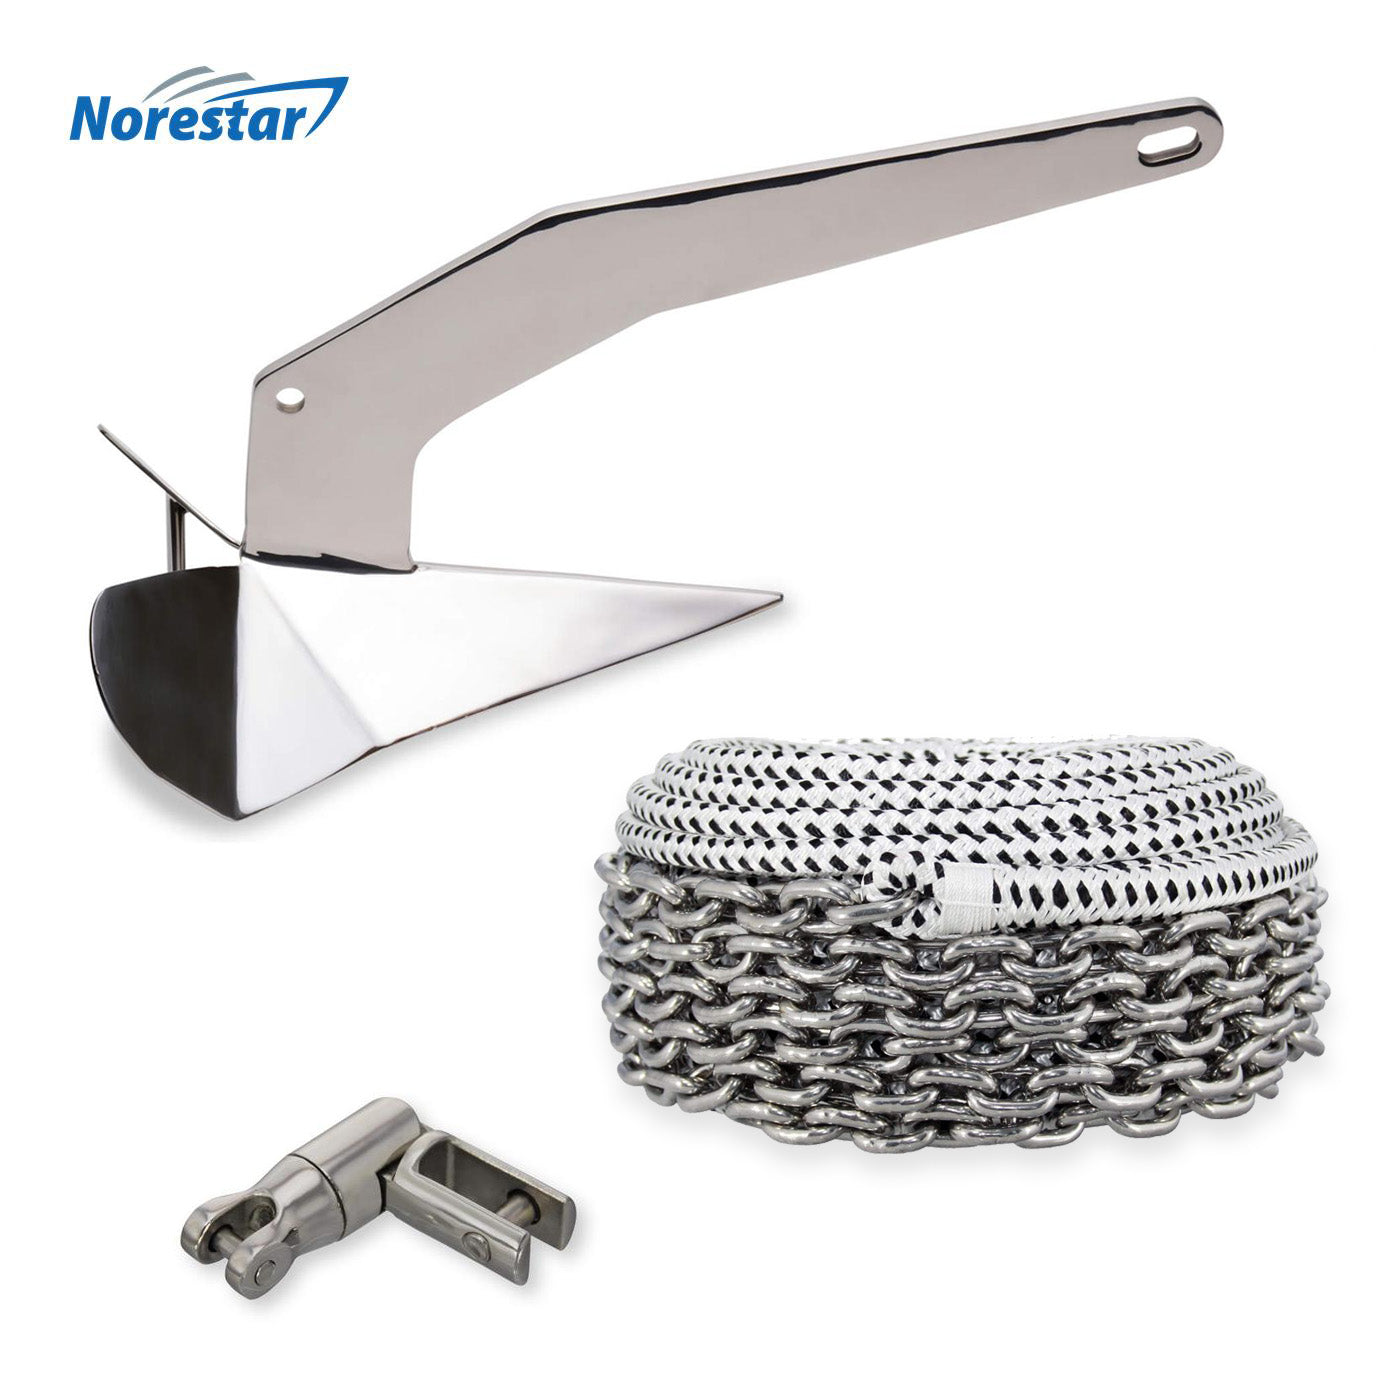 Norestar Wing Anchor, Rode, and Swivel Windlass Ready Kit for